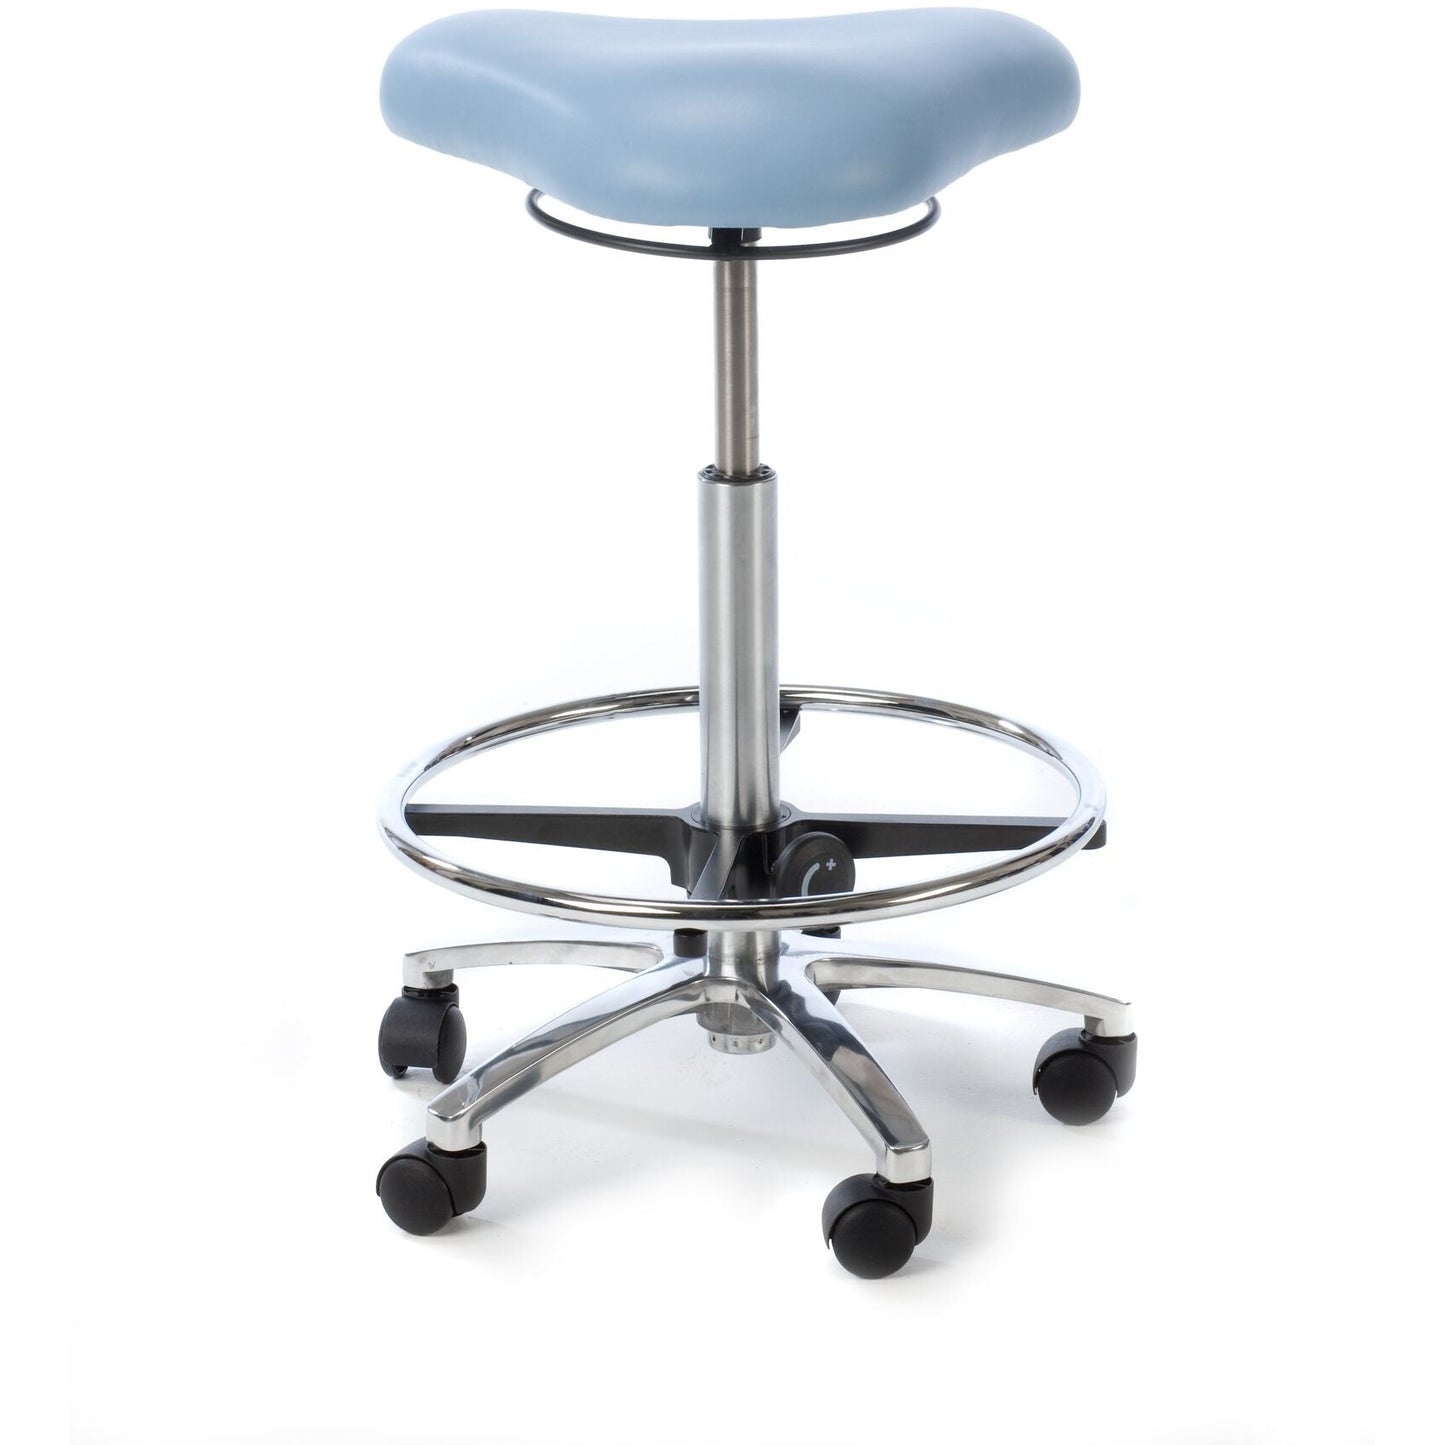 Premium Sonography Stool - High Model - Height Range 59-78cm - Foot support ring fitted